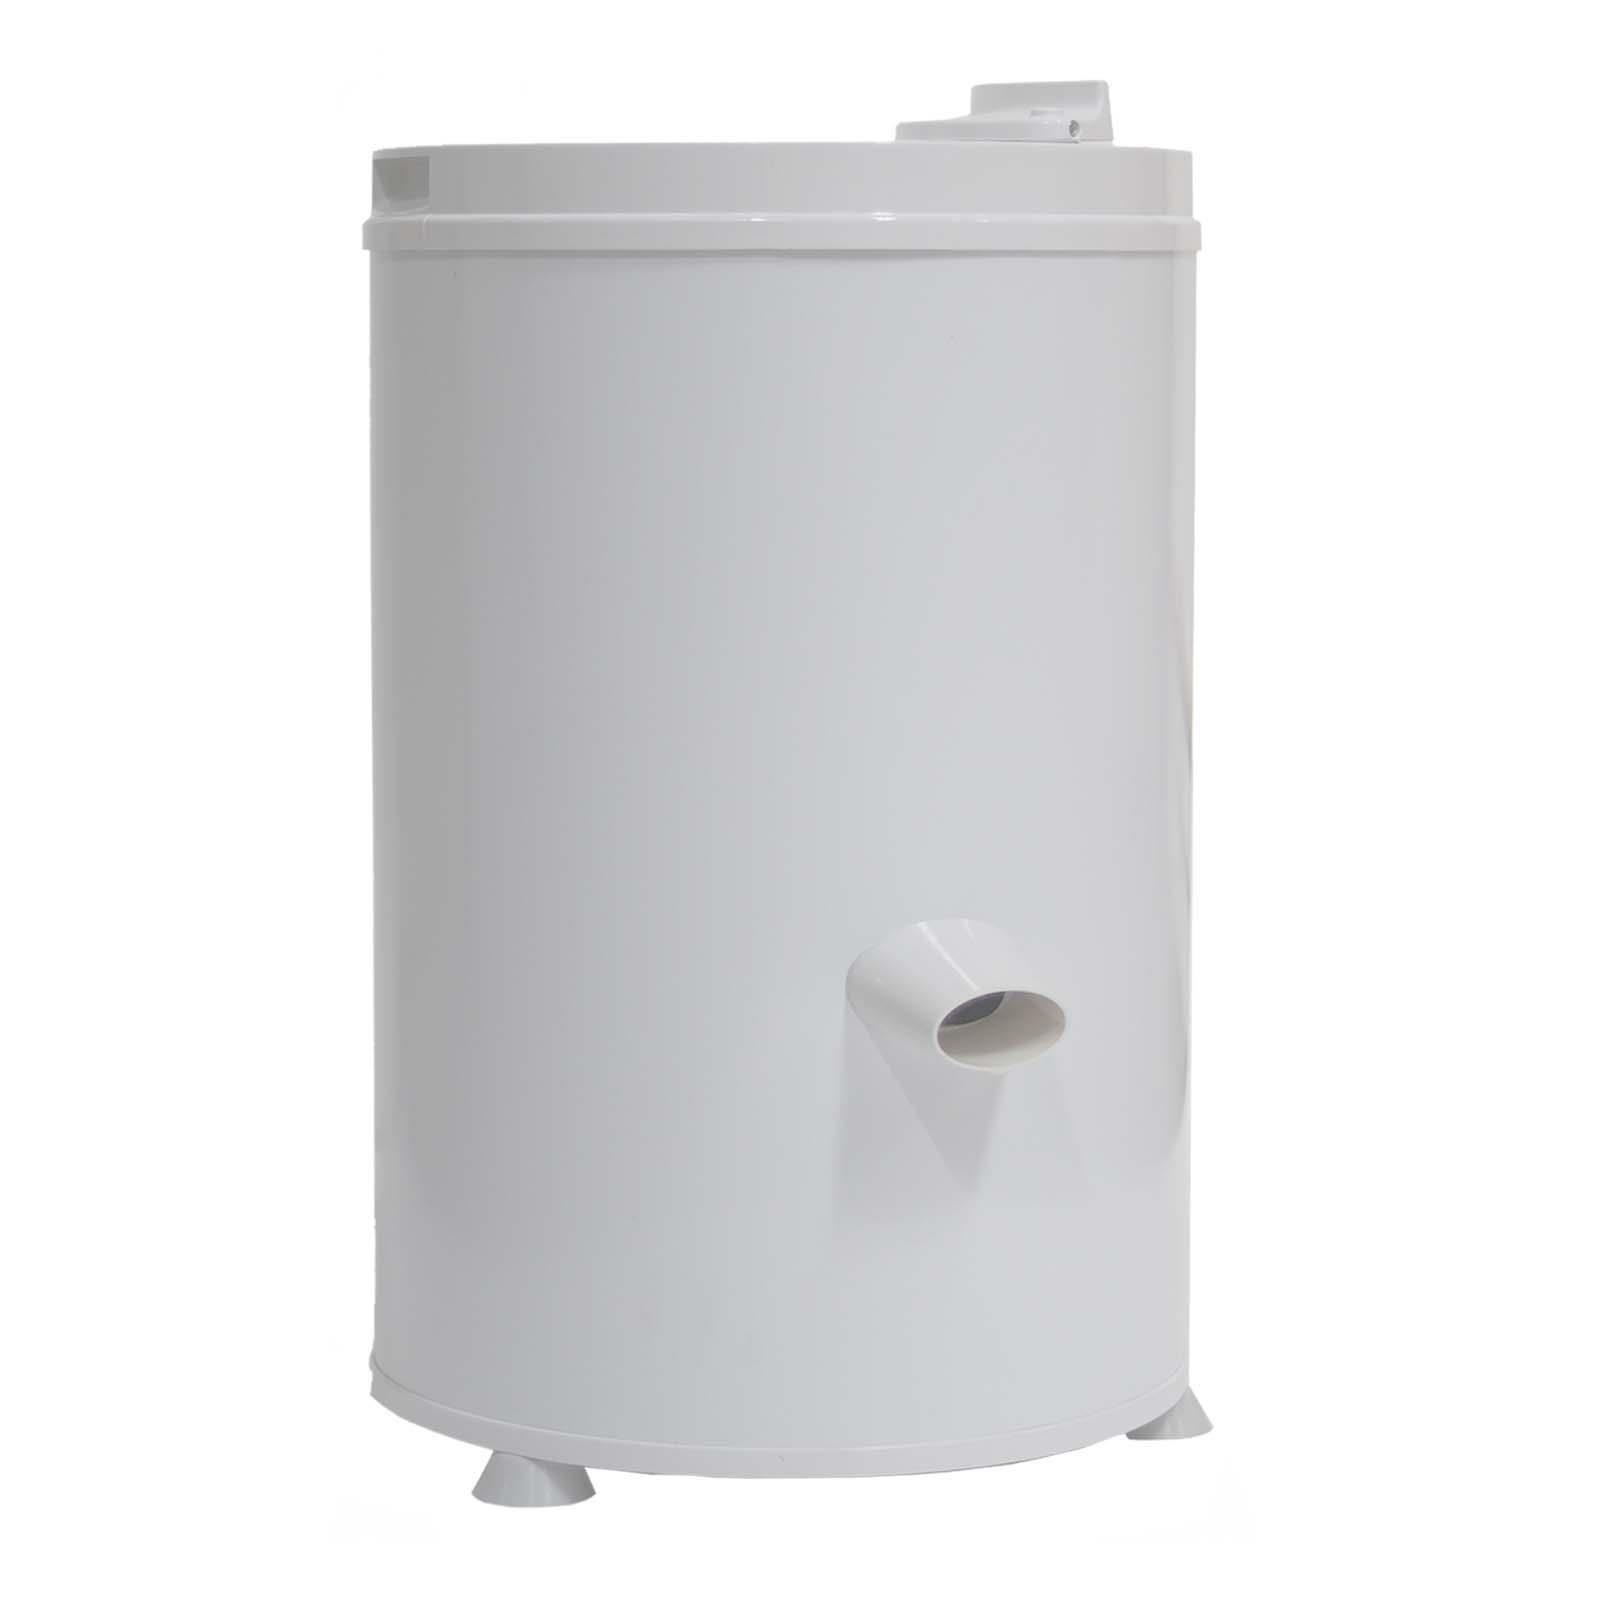 3kg Gravity Spin Dryer In White 2800rpm, 350W - SD3WH